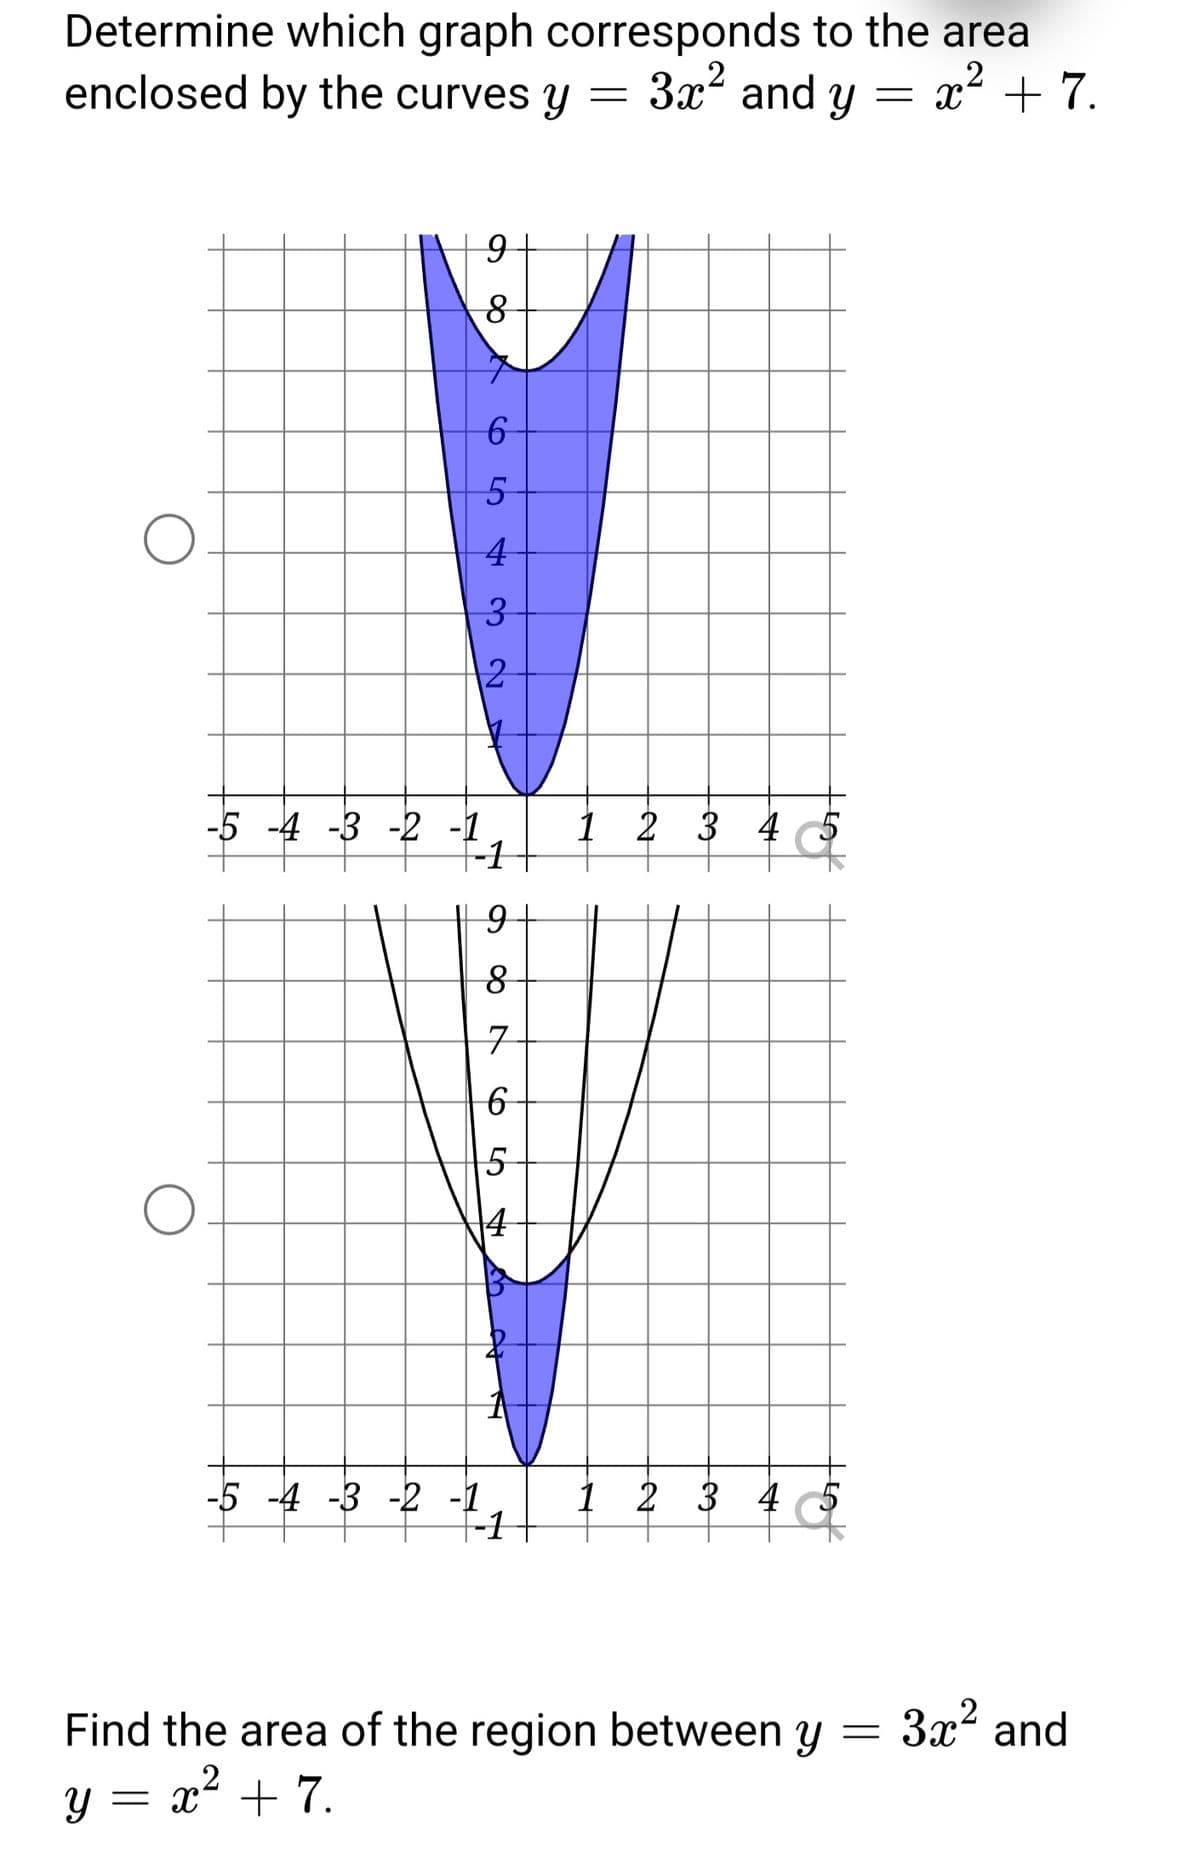 Determine which graph corresponds to the area
enclosed by the curves y = 3x and y = x² + 7.
%3D
4
3.
-5 -4 -3 -2 -1
F-1
1 2 3 4
14
-5 -4 -3 -2 -1
-1
1 2 3 4
Find the area of the region between y
3x2 and
y = x² + 7.
